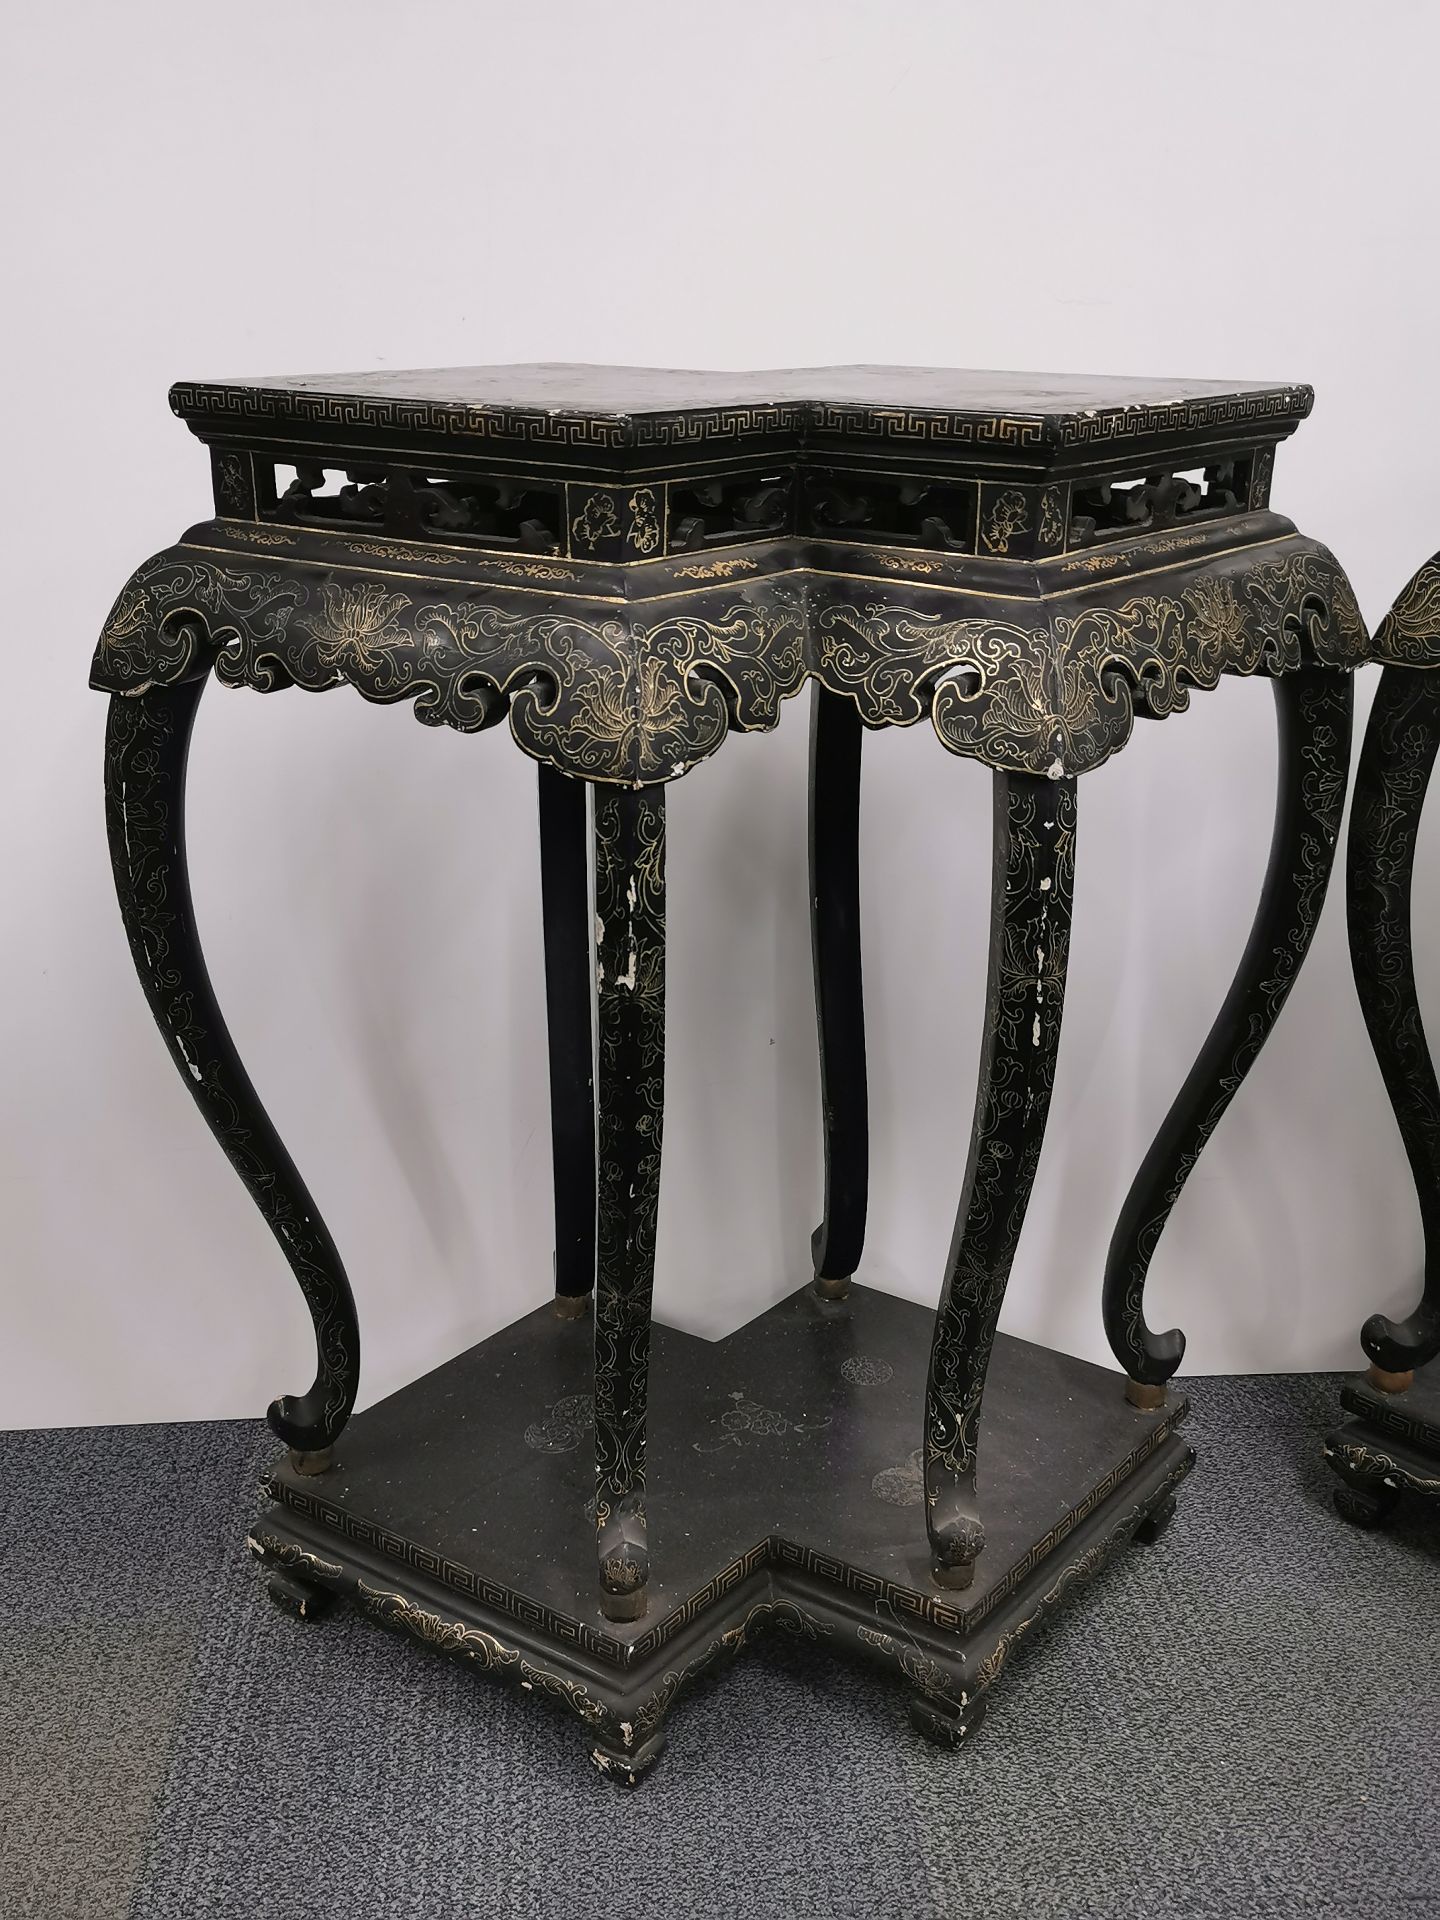 A pair of interesting Chinese lacquered carved wood stands, W. 86cm, H. 90cm. - Image 4 of 4